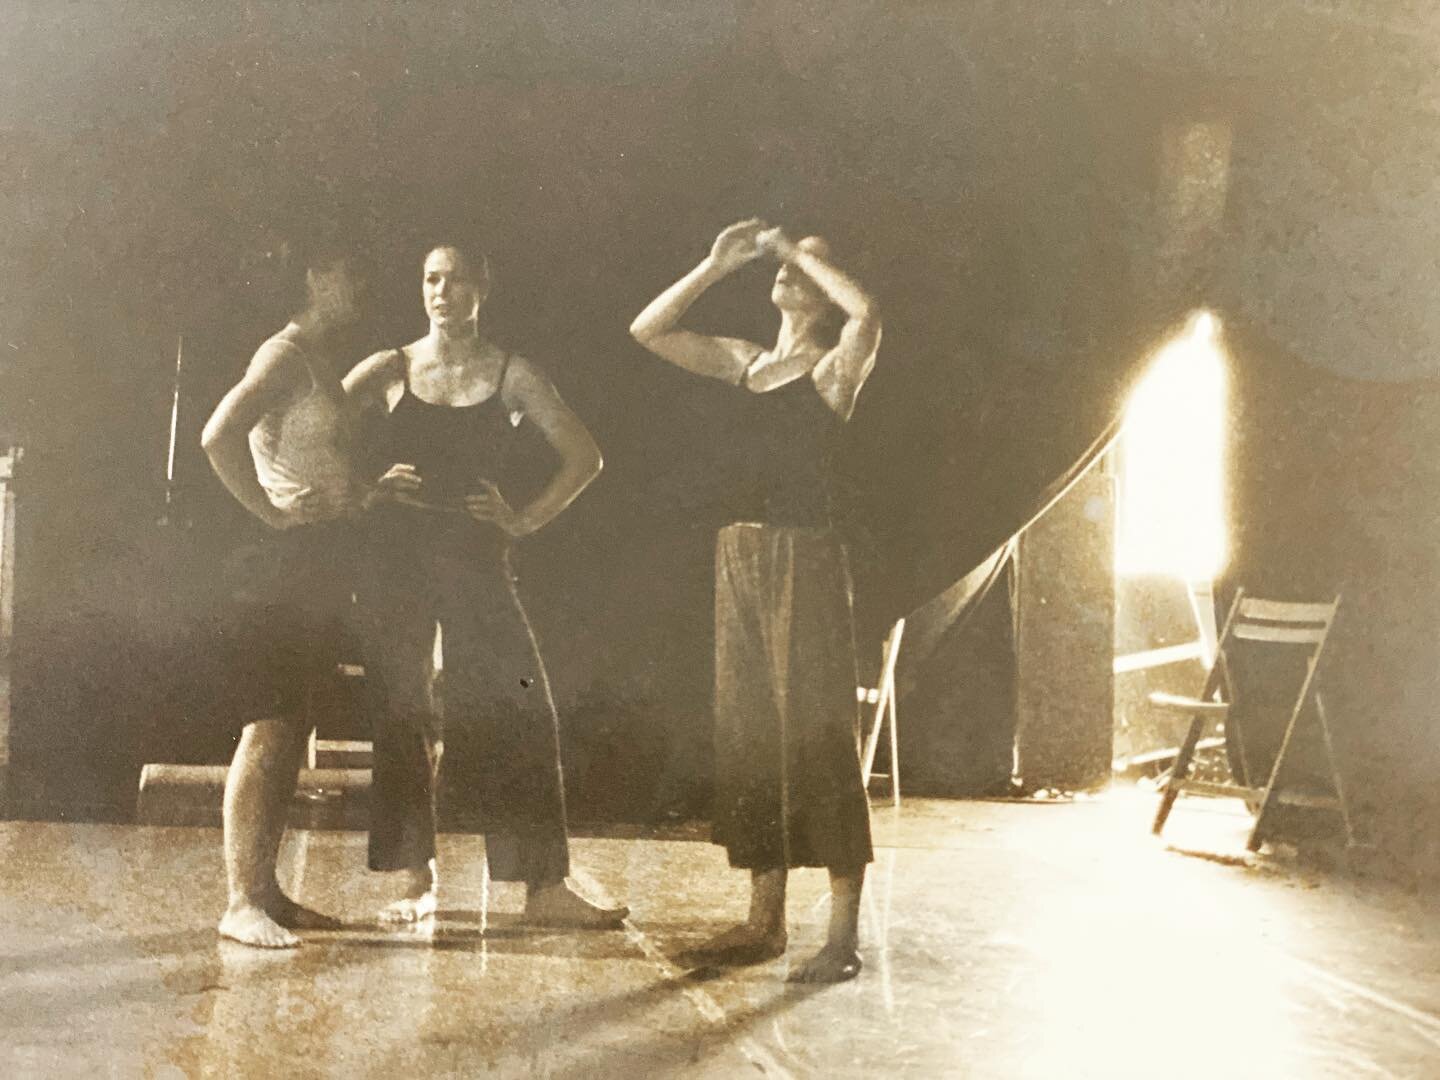 The rehearsal I hurt my back- 1997 ODC San Francisco.
.
I was 23 when I was introduced to Pilates. At my first lesson my teacher quoted Mr. Pilates saying &ldquo;you are as young as your spinal column&rdquo;. 
I was struck by this statement as I real